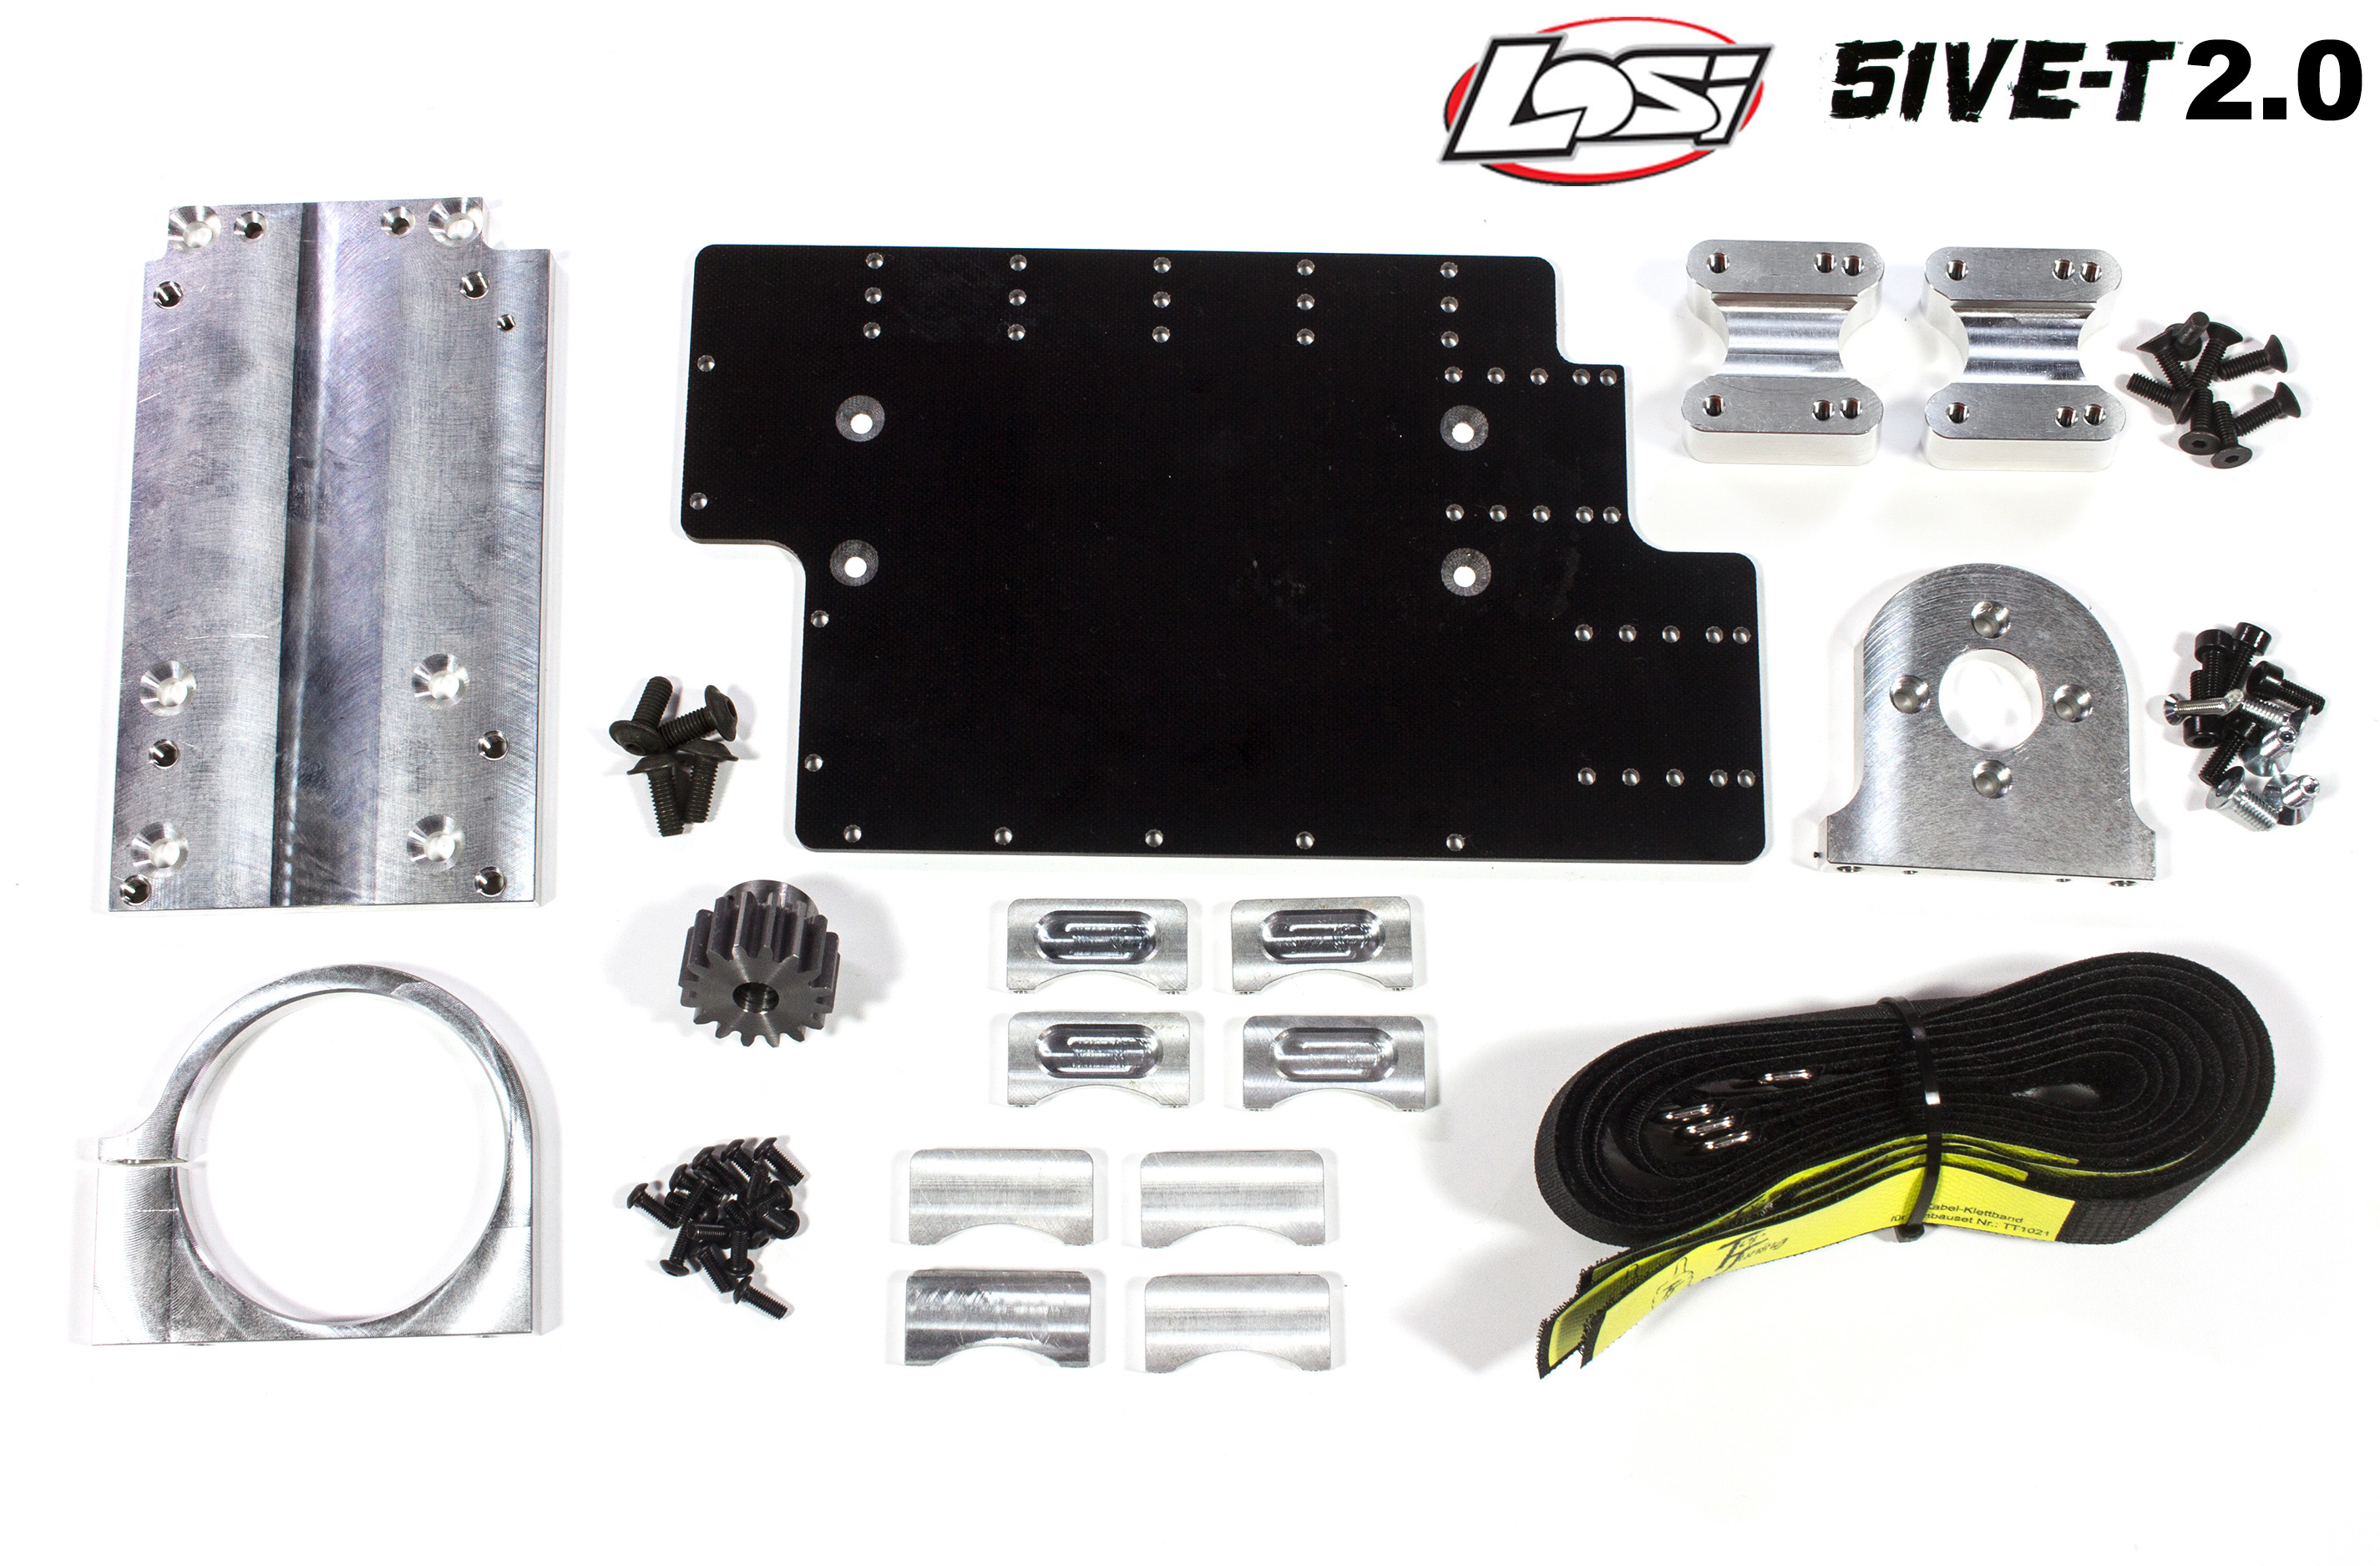 TT1024 Top Tuning Electric conversion kit for Losi 5ive-T 2.0